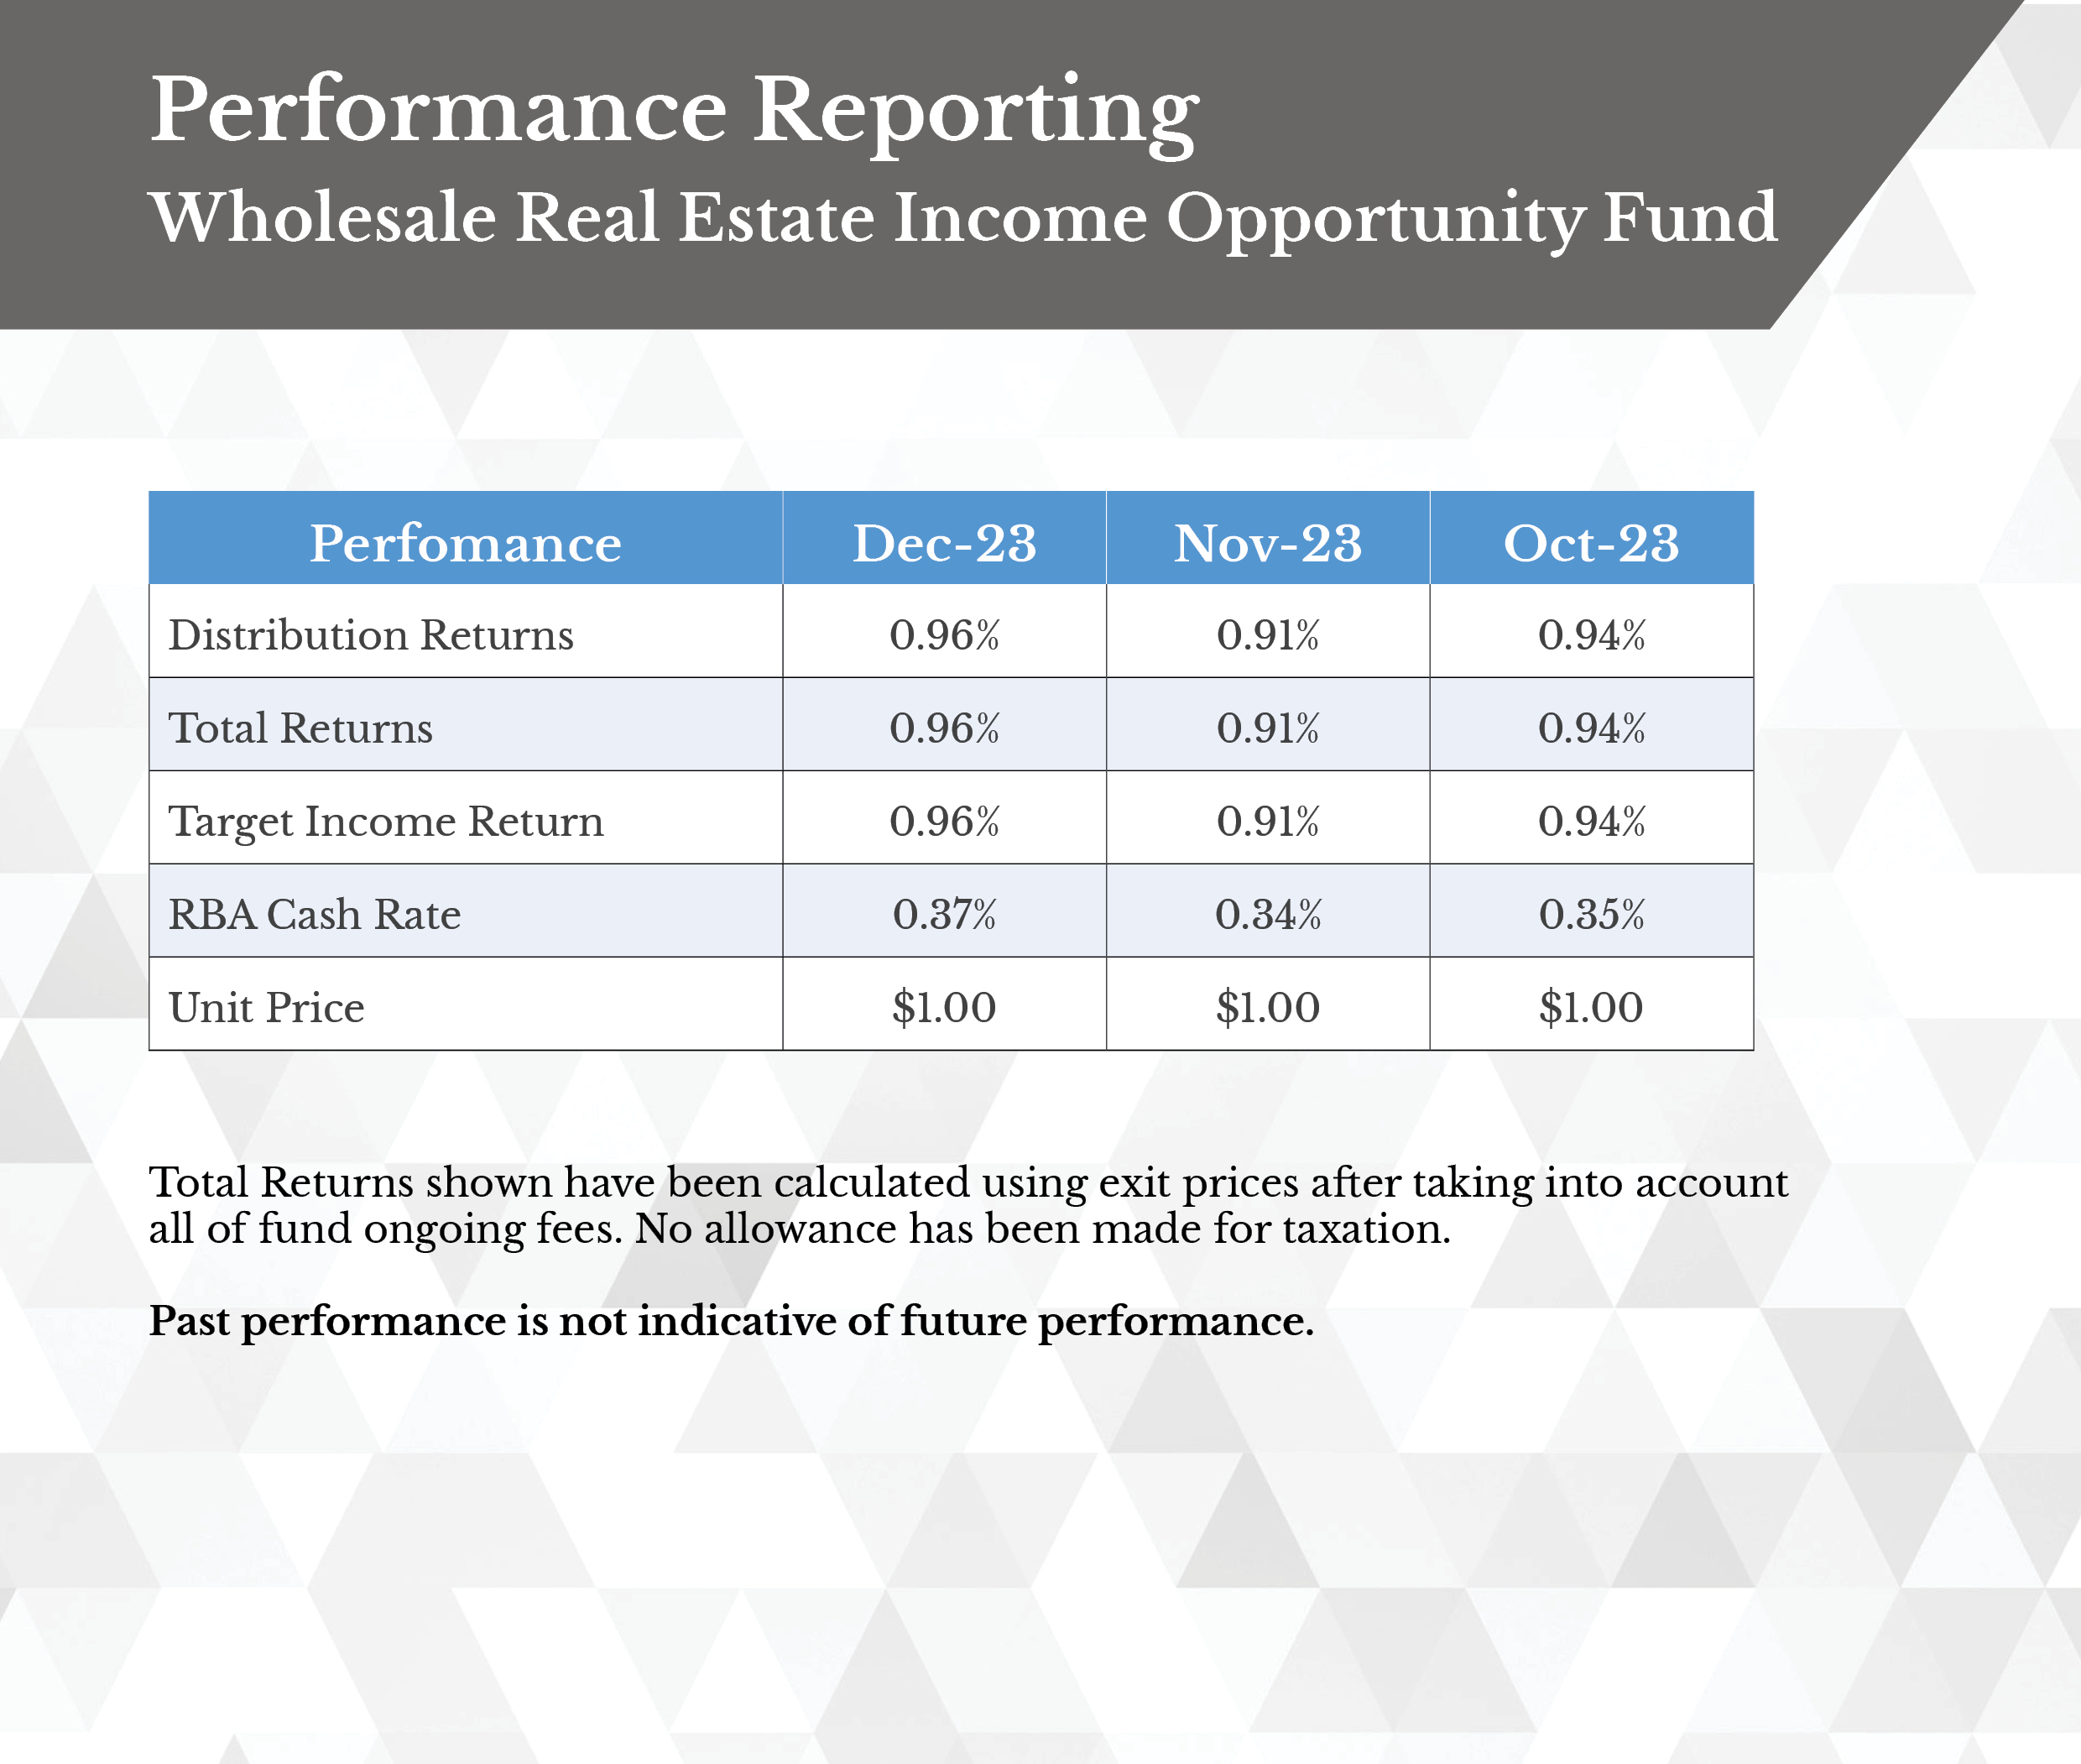 Capital Prudential Performance Reporting